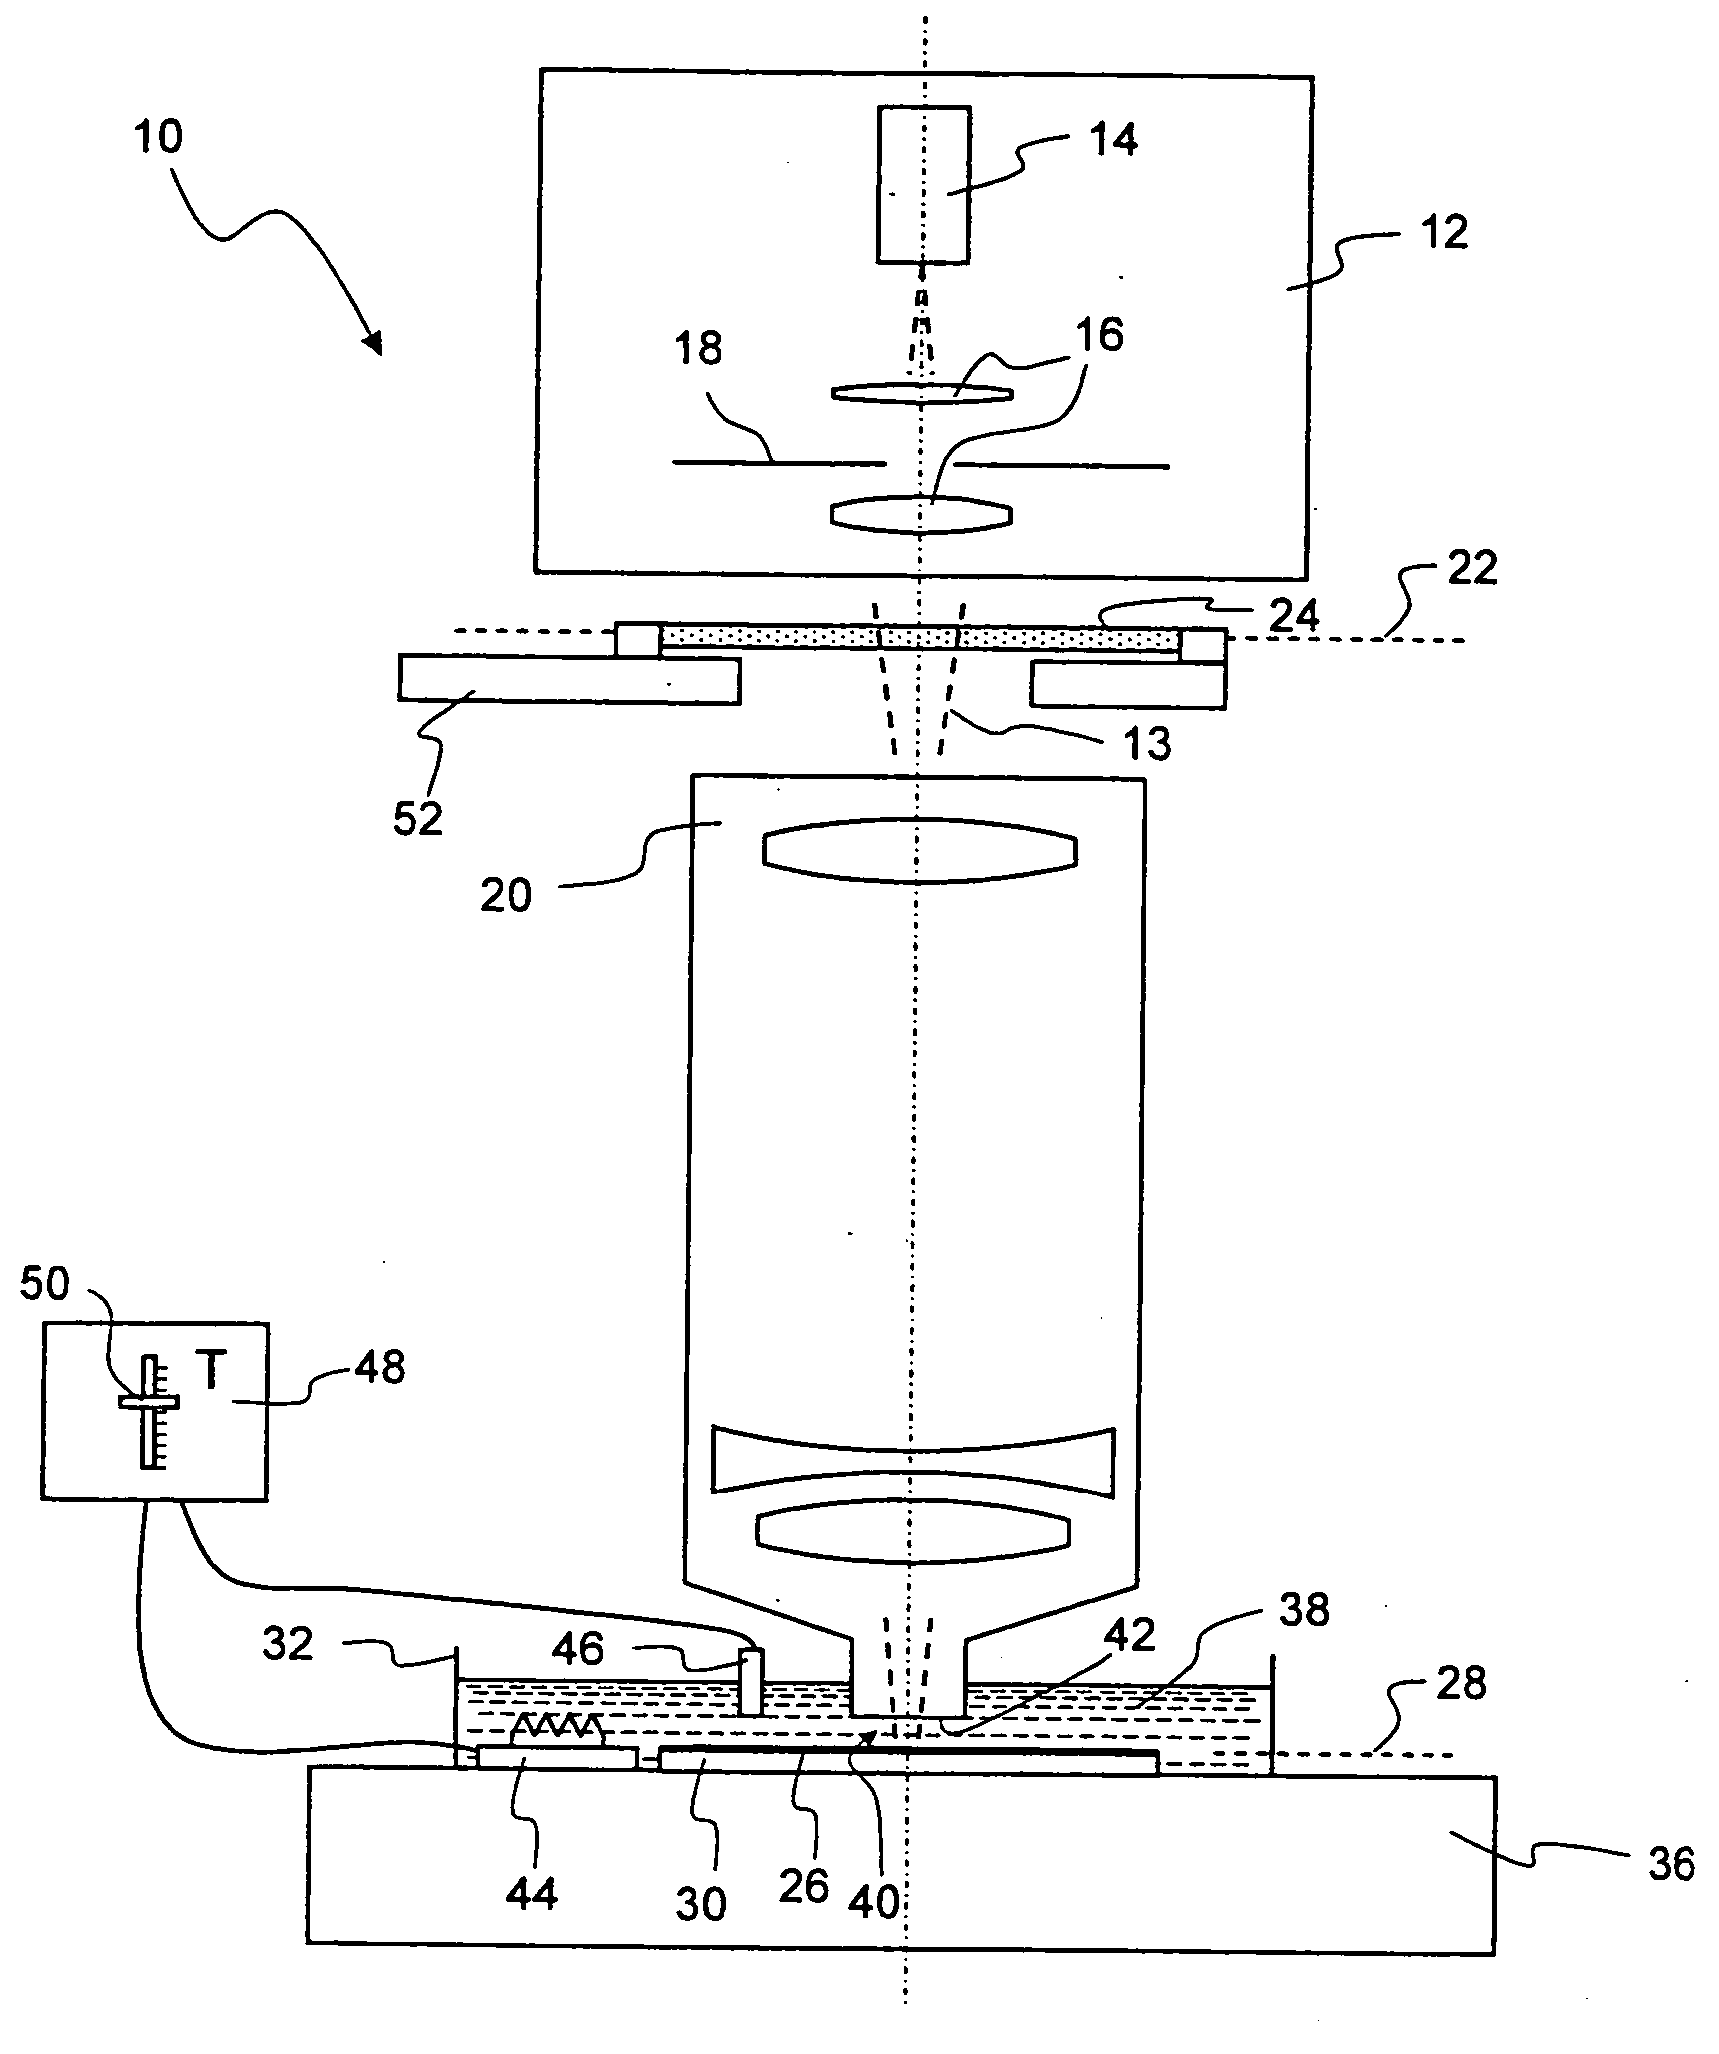 Method for improving an optical imaging property of a projection objective of a microlithographic projection exposure apparatus